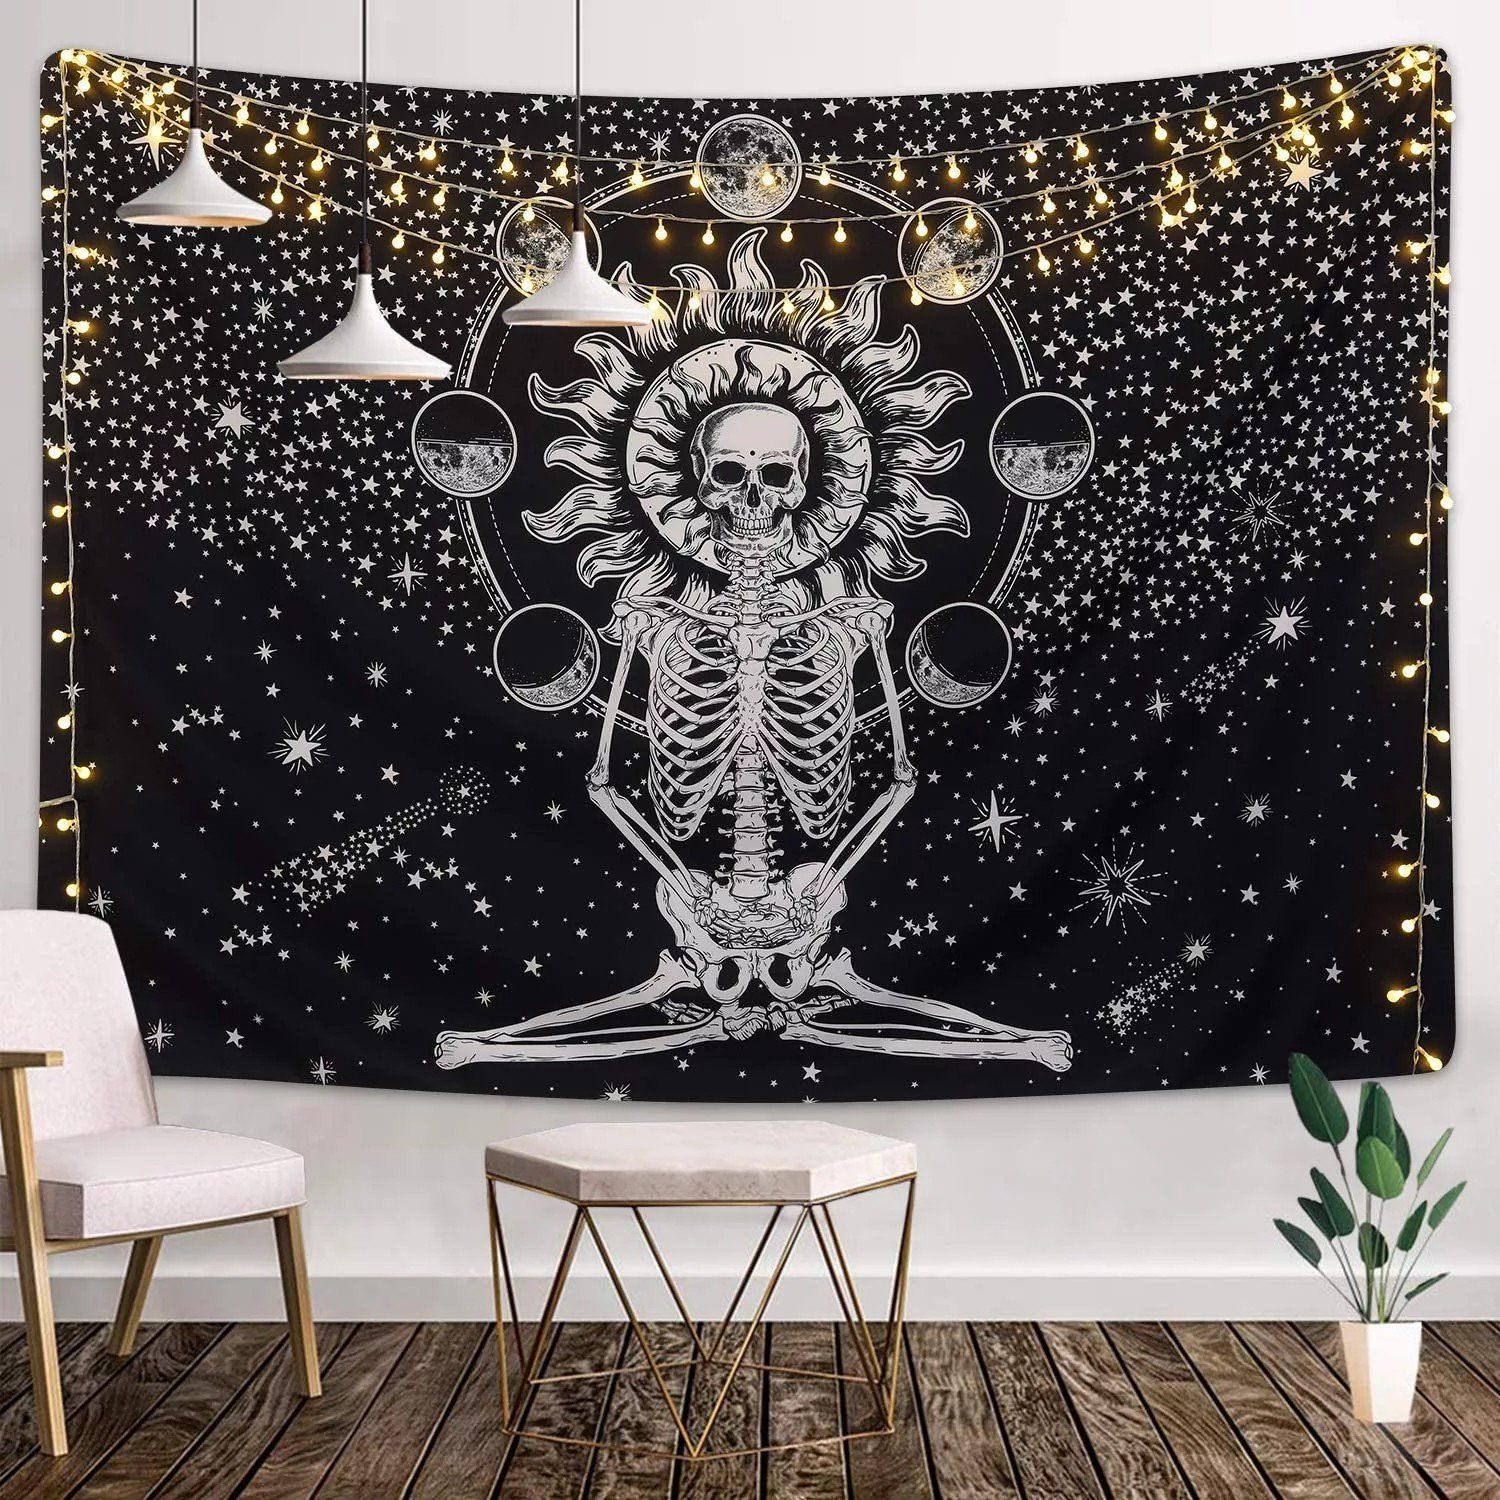 Skeleton Moon Phases Tapestry - The Tapestry Store Company